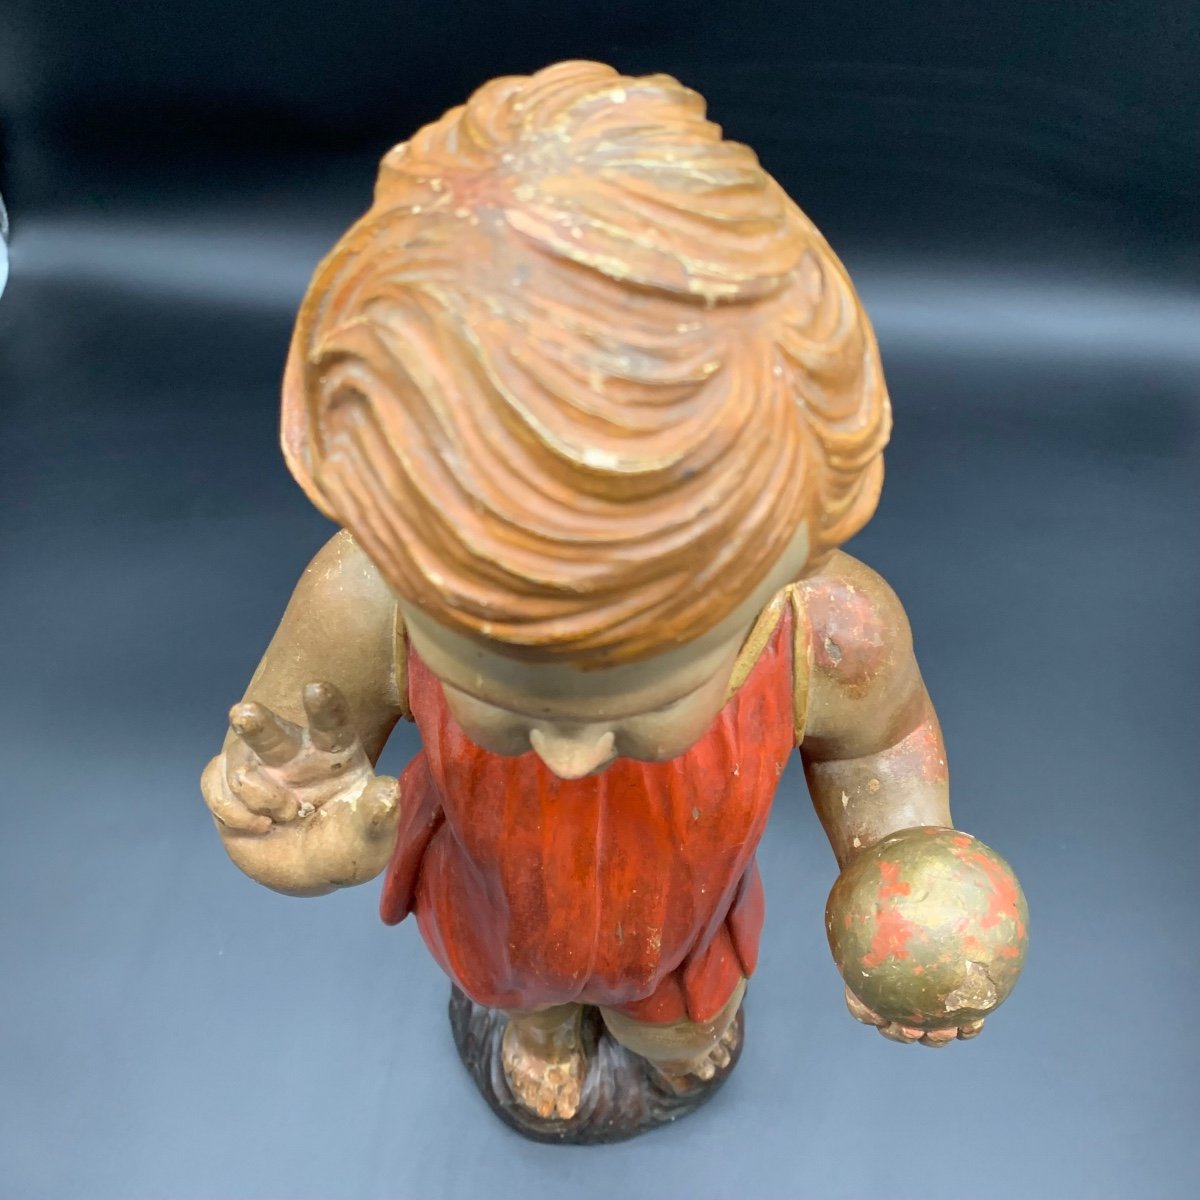 Polychrome Wooden Sculpture Depicting The Blessing Child Jesus- 19th Century-photo-7